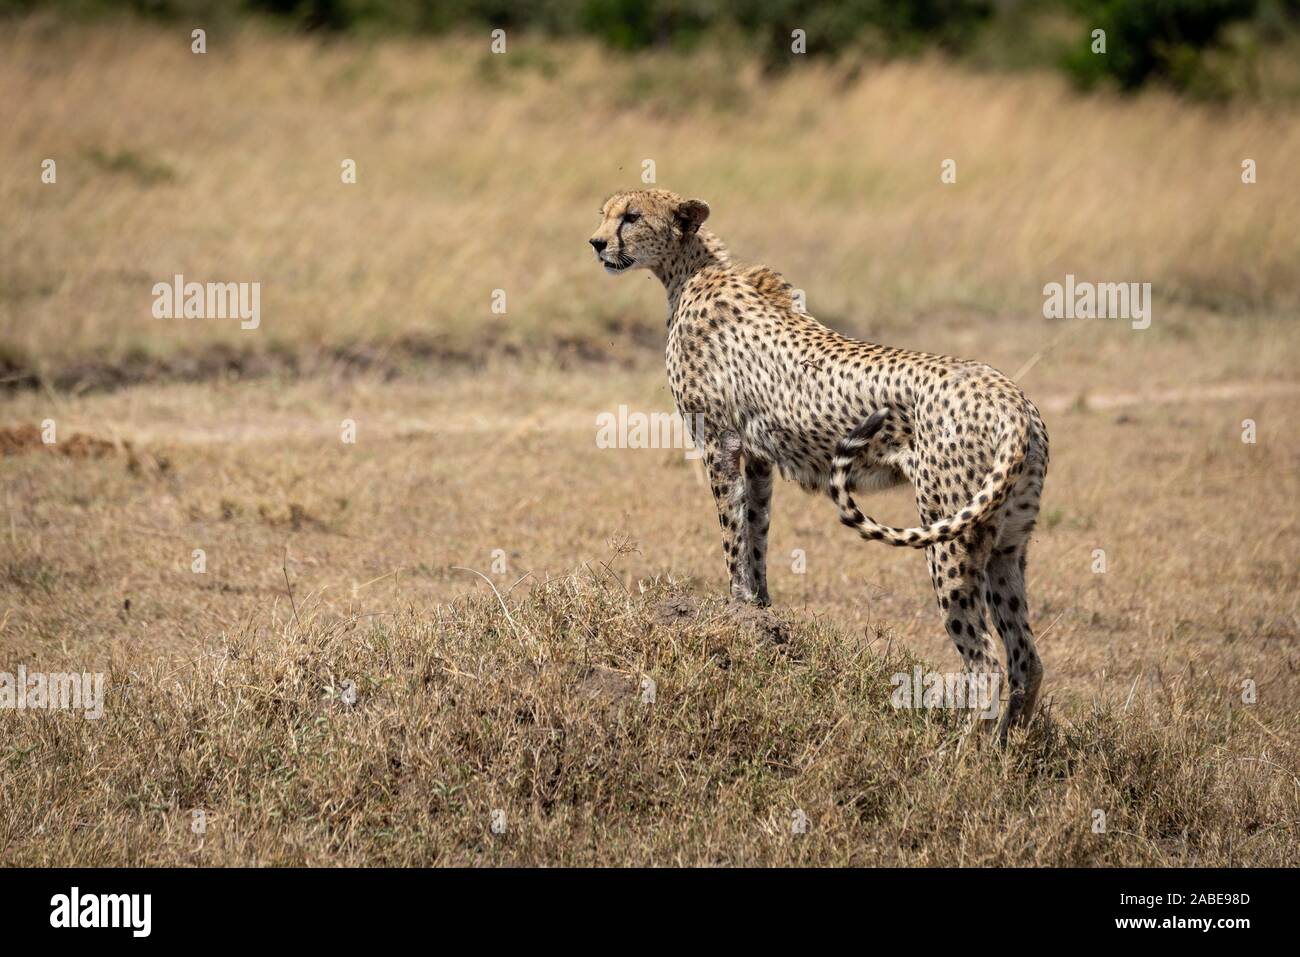 Female cheetah stands on mound flicking tail Stock Photo